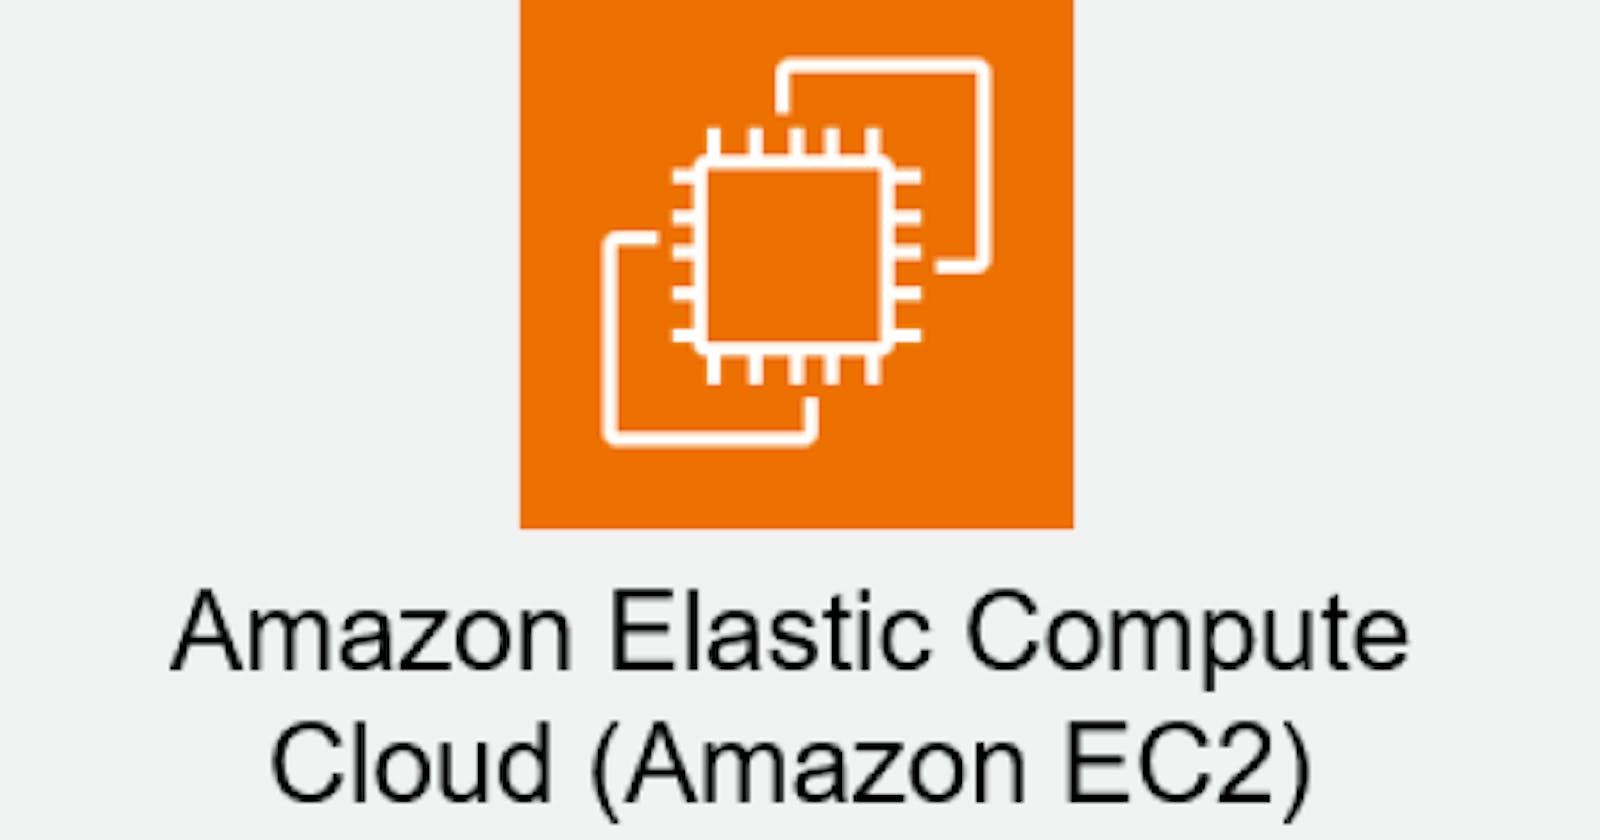 How to Log in to every Linux EC2 Amazon Machine Images: Amazon Linux, Ubuntu, Red Hat, SUSE Linux, Debian